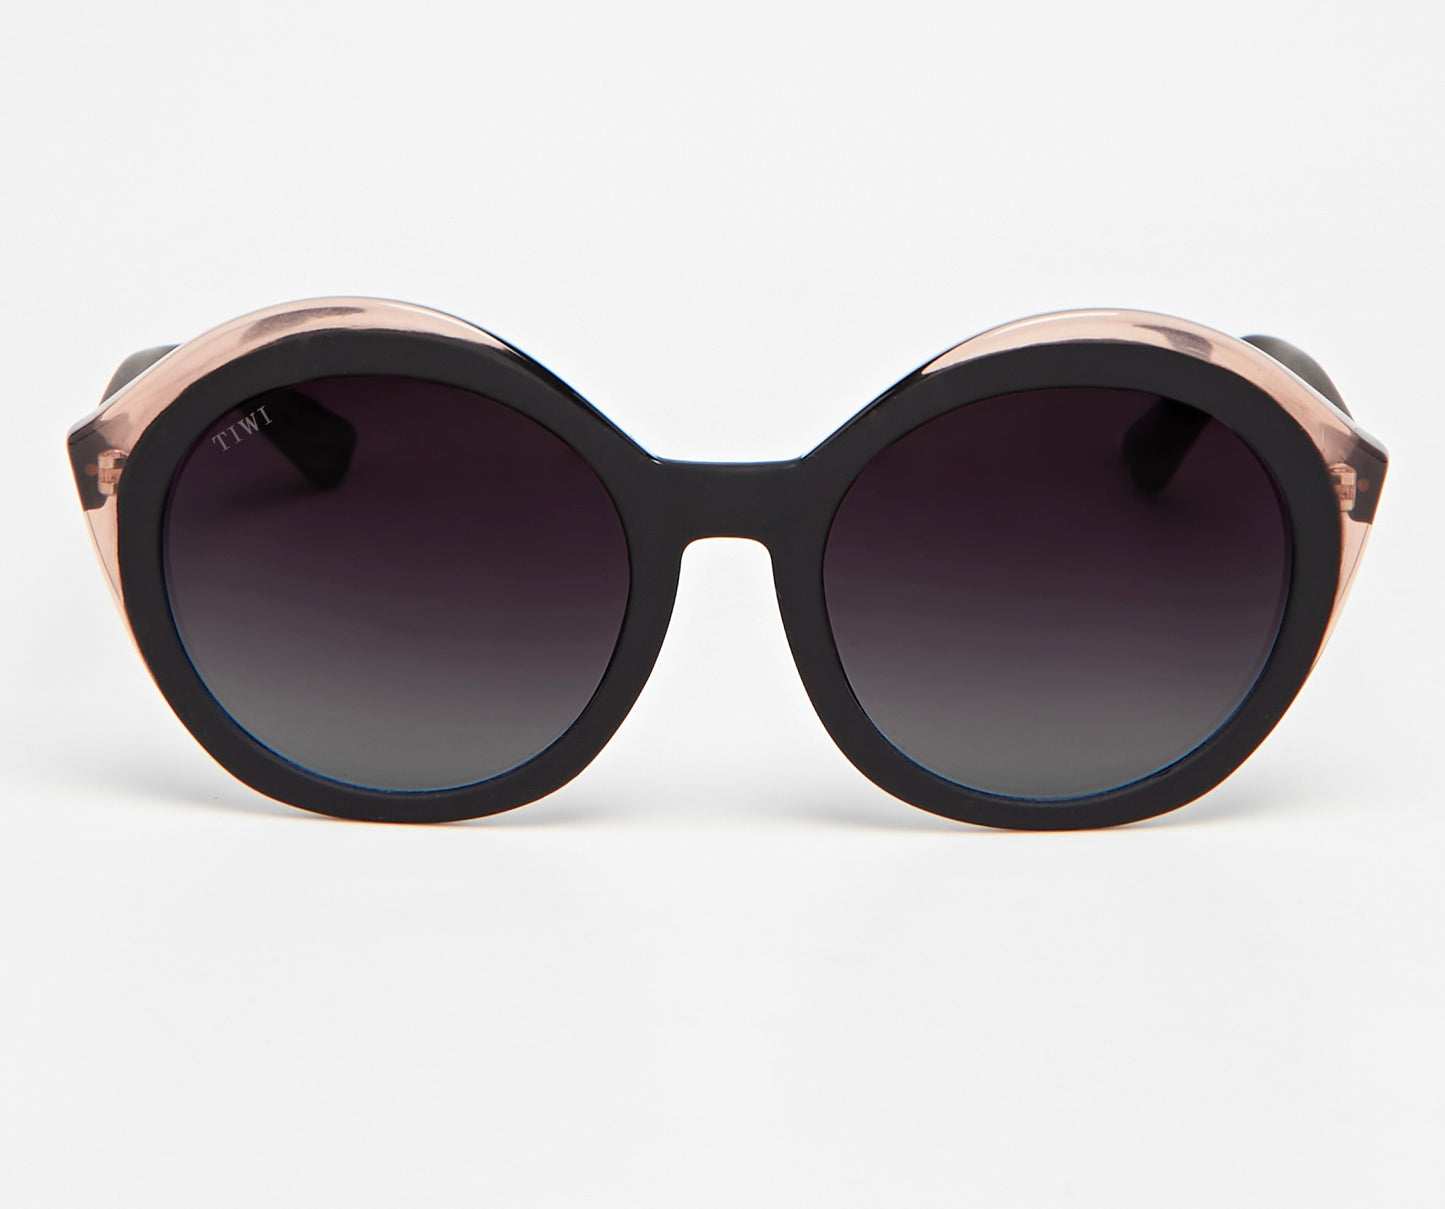 MELVILLE  Available in more colors Bicolor Rubber Black/Pink with Burgundy Gradient Lenses  